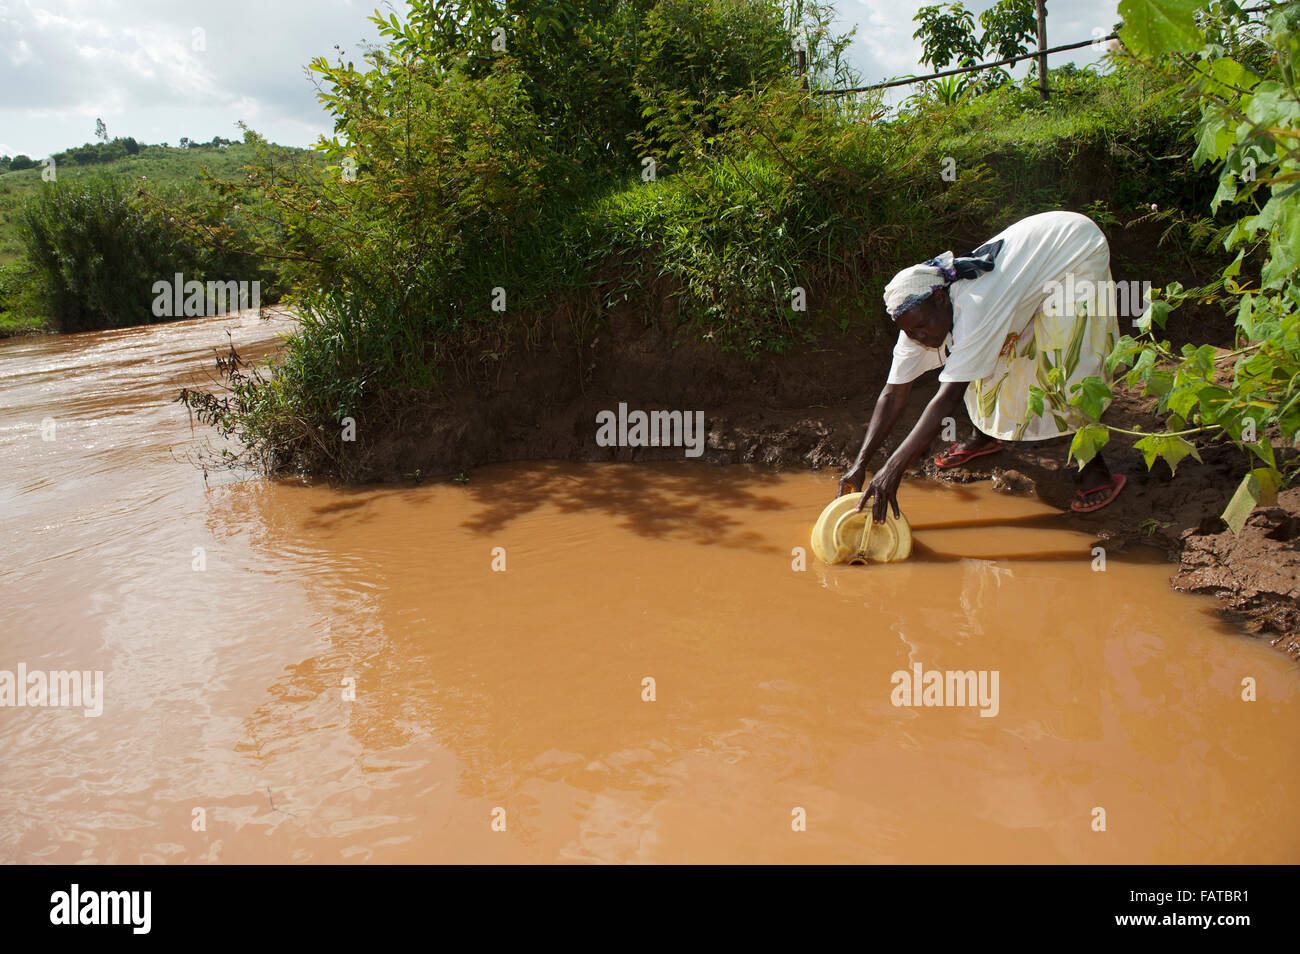 Woman getting water out of a muddy river for use  as drinking water. Kenya. Stock Photo